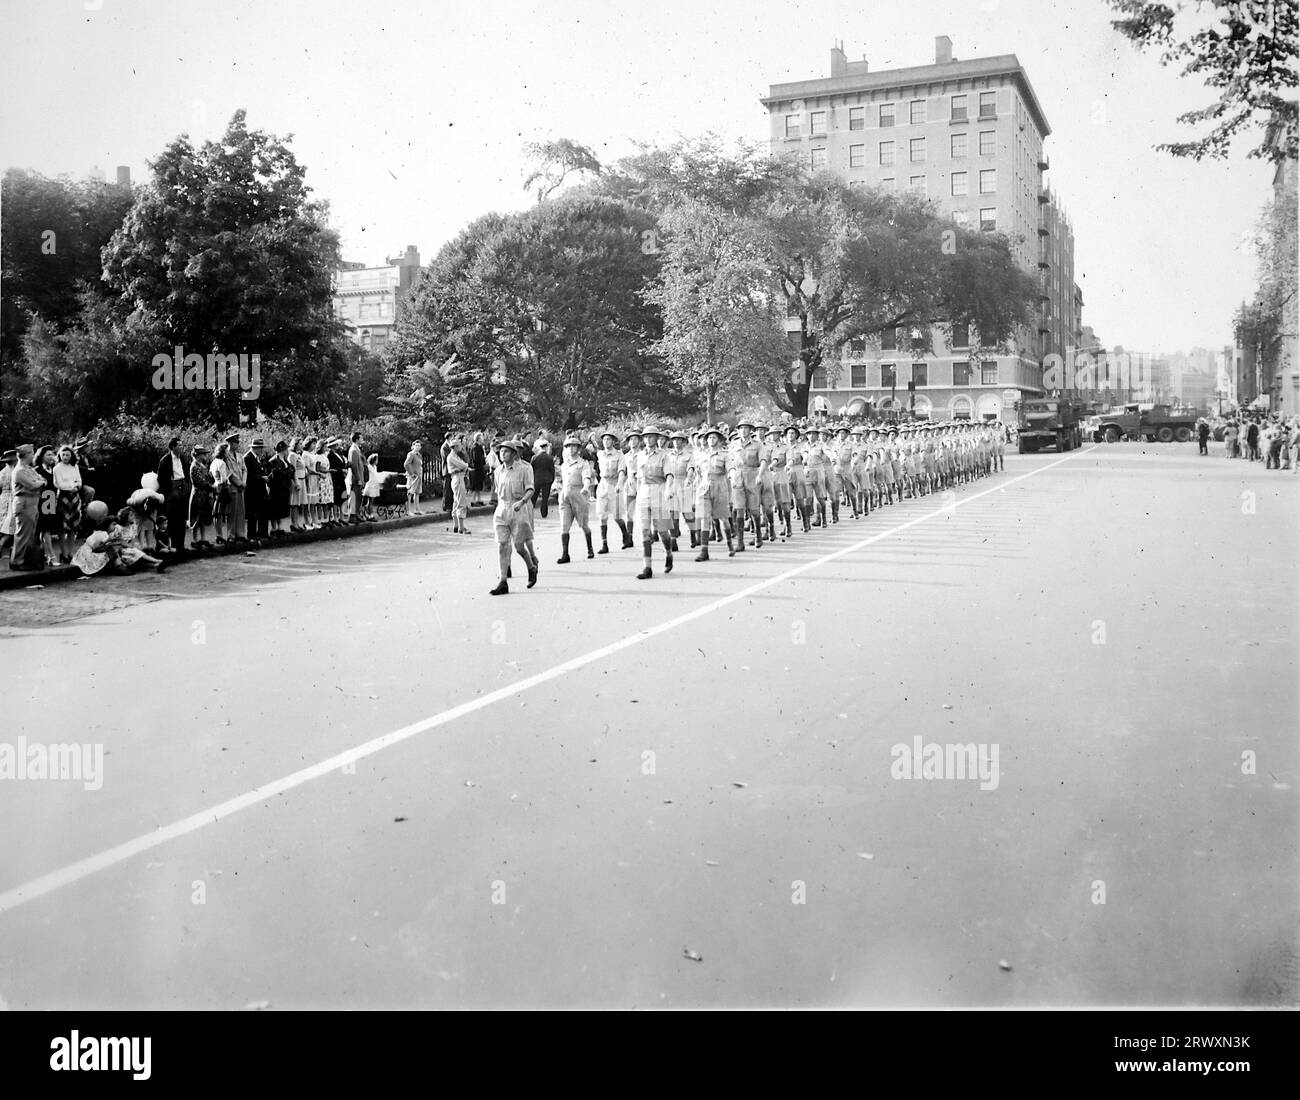 Parade through Boston. Rare photograph: From a collection compiled by an unknown British serviceman covering the No. 1 Composite Demonstration, AA Battery, tour of the USA, from July 11th 1943. This is one from over one hundred images in the collection which were on average around 4x3 inches. Stock Photo